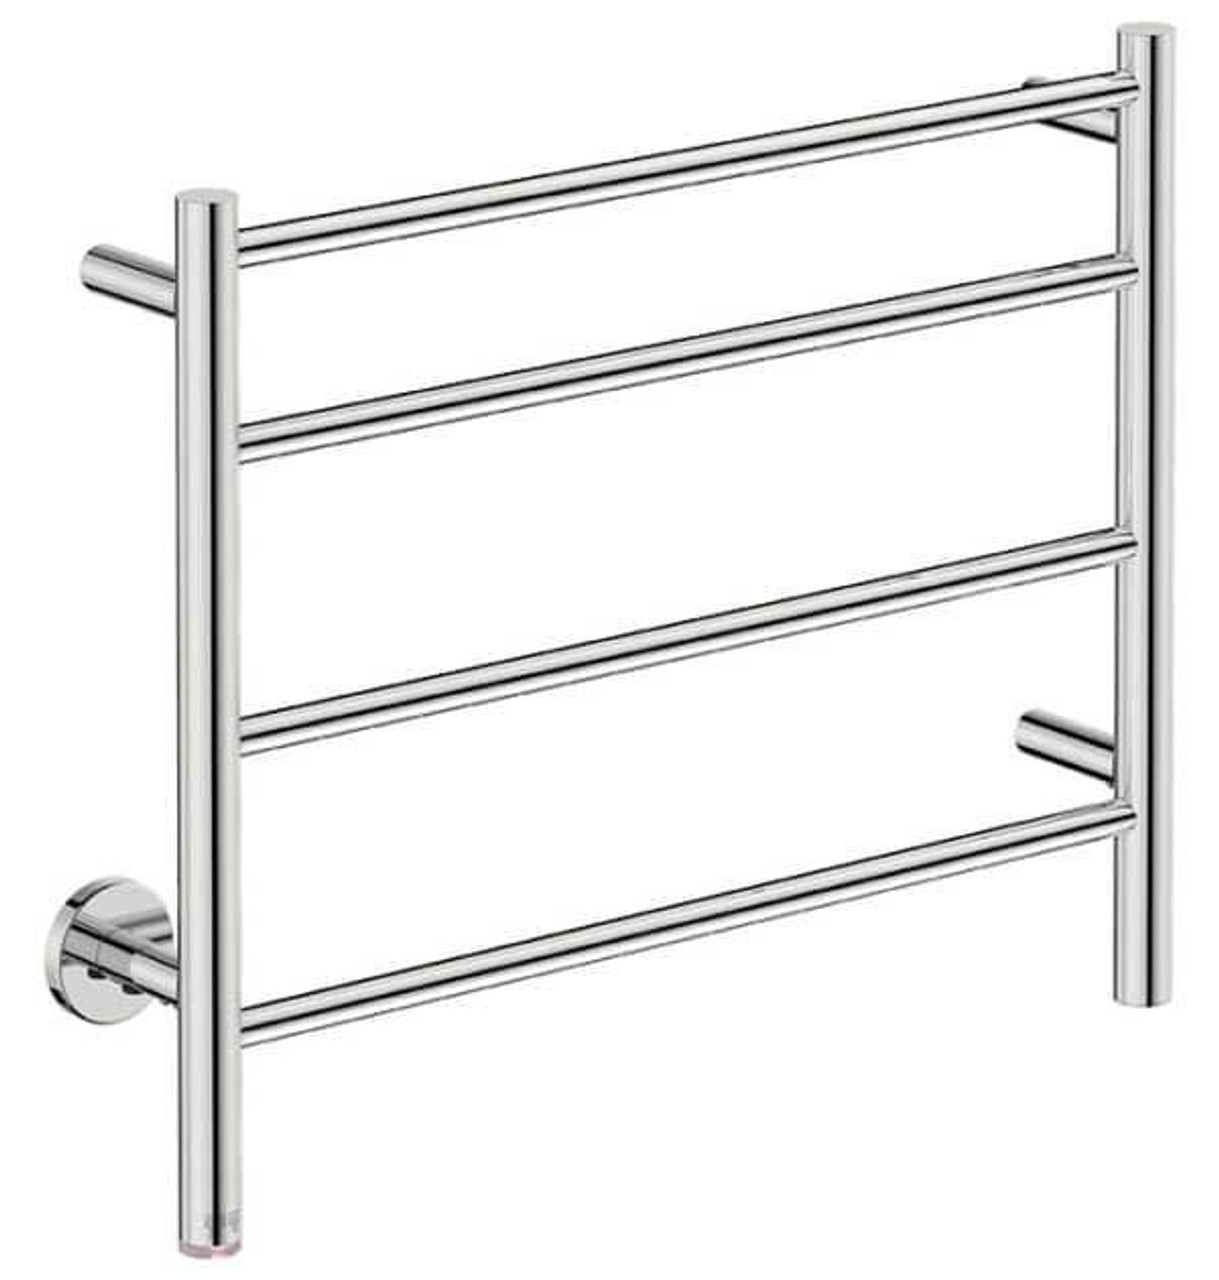 357017 Bathroom Butler Natural 4 Bar 650mm Straight Heated Towel Rail with PTSelect Switch Polished Stainless Steel NAT04231-PTS-POLS